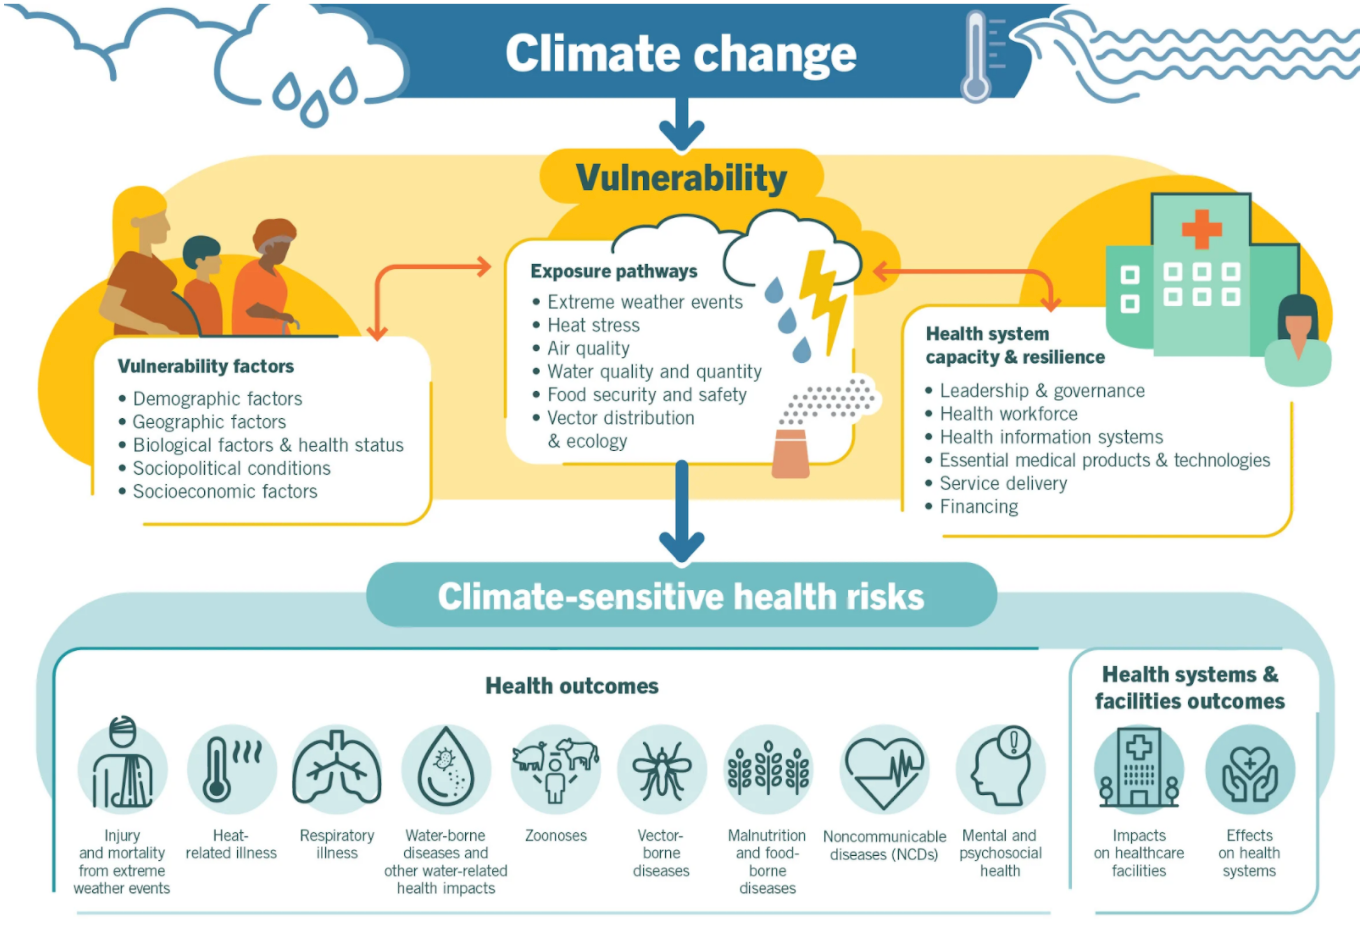 An overview of climate-sensitive health risks, their exposure pathways and vulnerability factors. Climate change impacts health both directly and indirectly, and is strongly mediated by environmental, social and public health determinants.